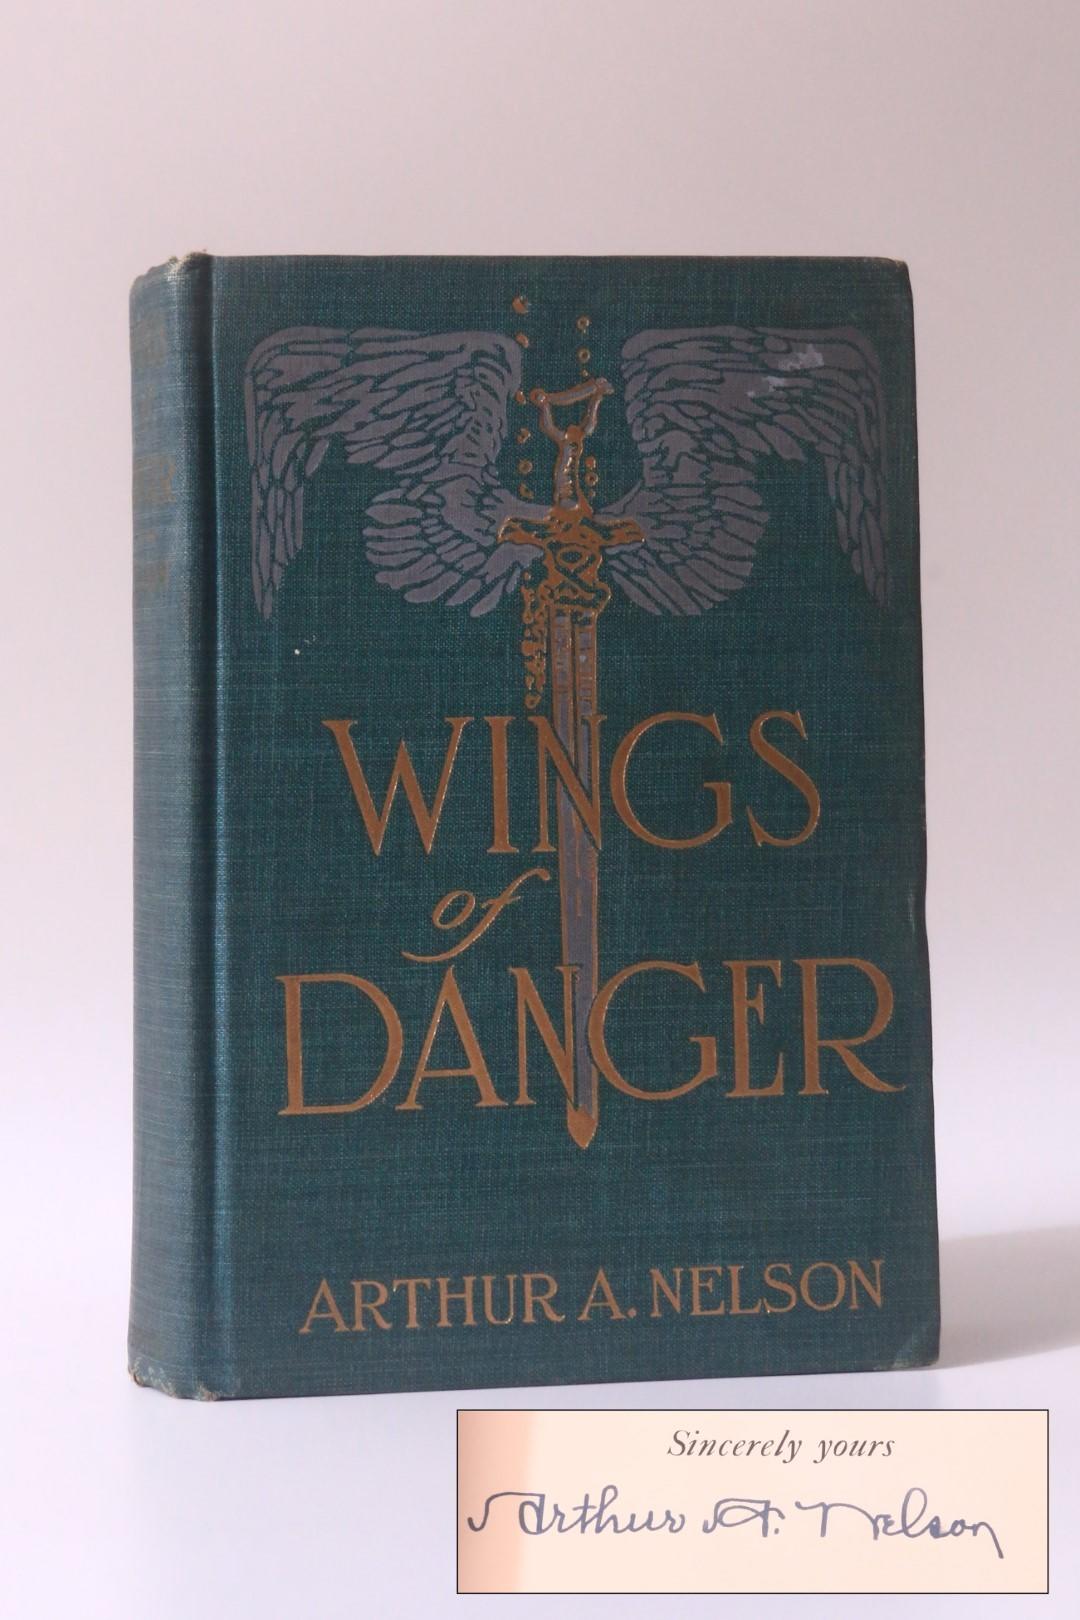 Arthur A. Nelson - Wings of Danger - Robert M. McBride, 1915, Signed First Edition.